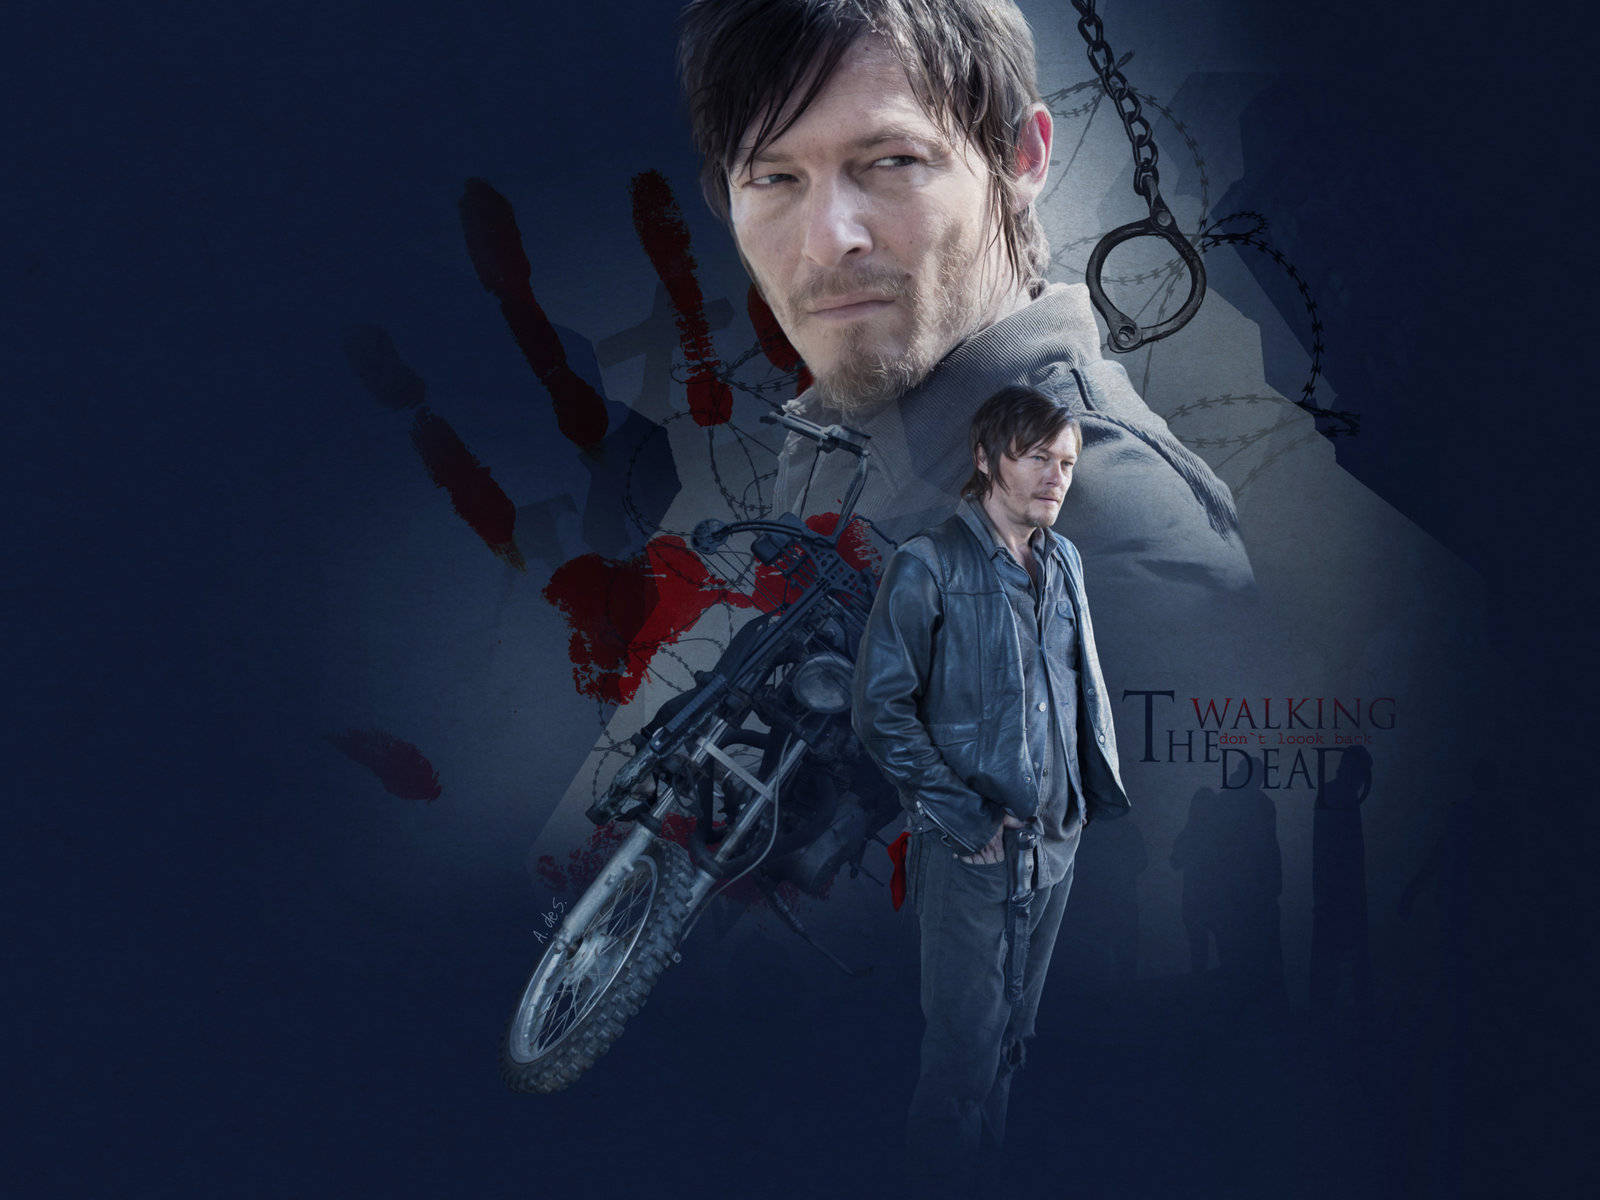 "You either fight or die" - Daryl, The Walking Dead Wallpaper